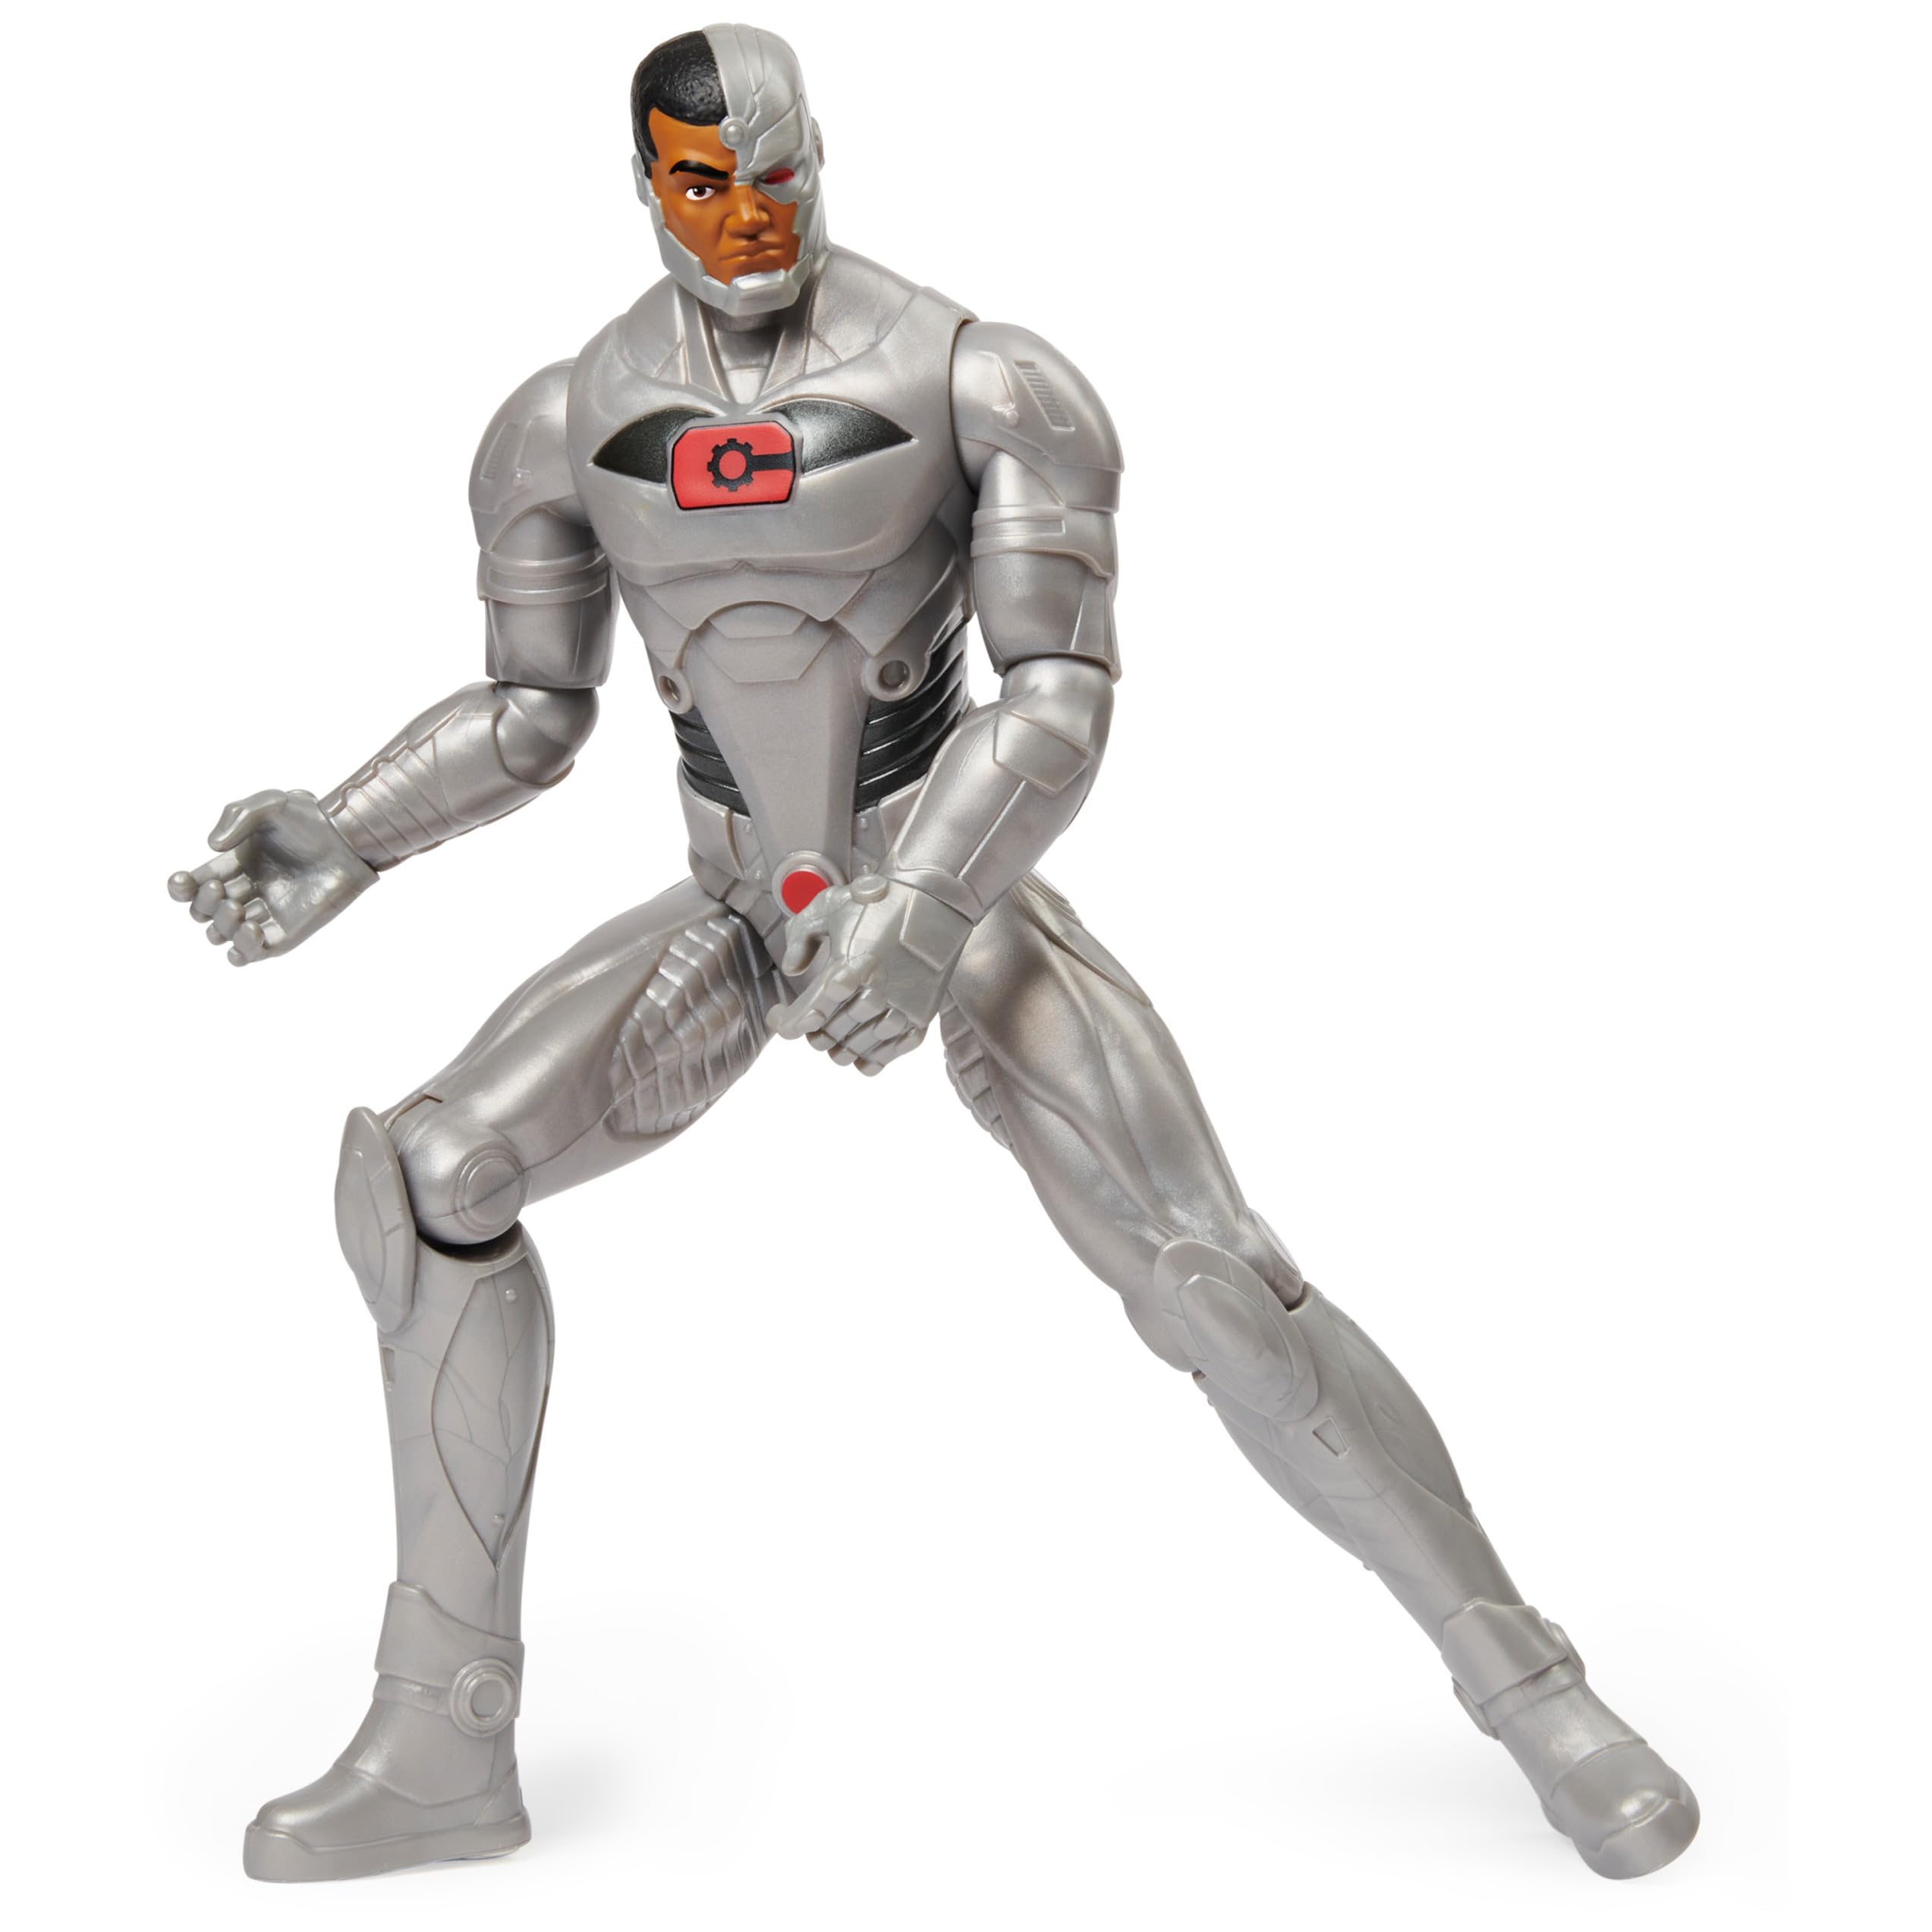 DC Comics 12-inch Cyborg Action Figure, Kids Toys for Boys